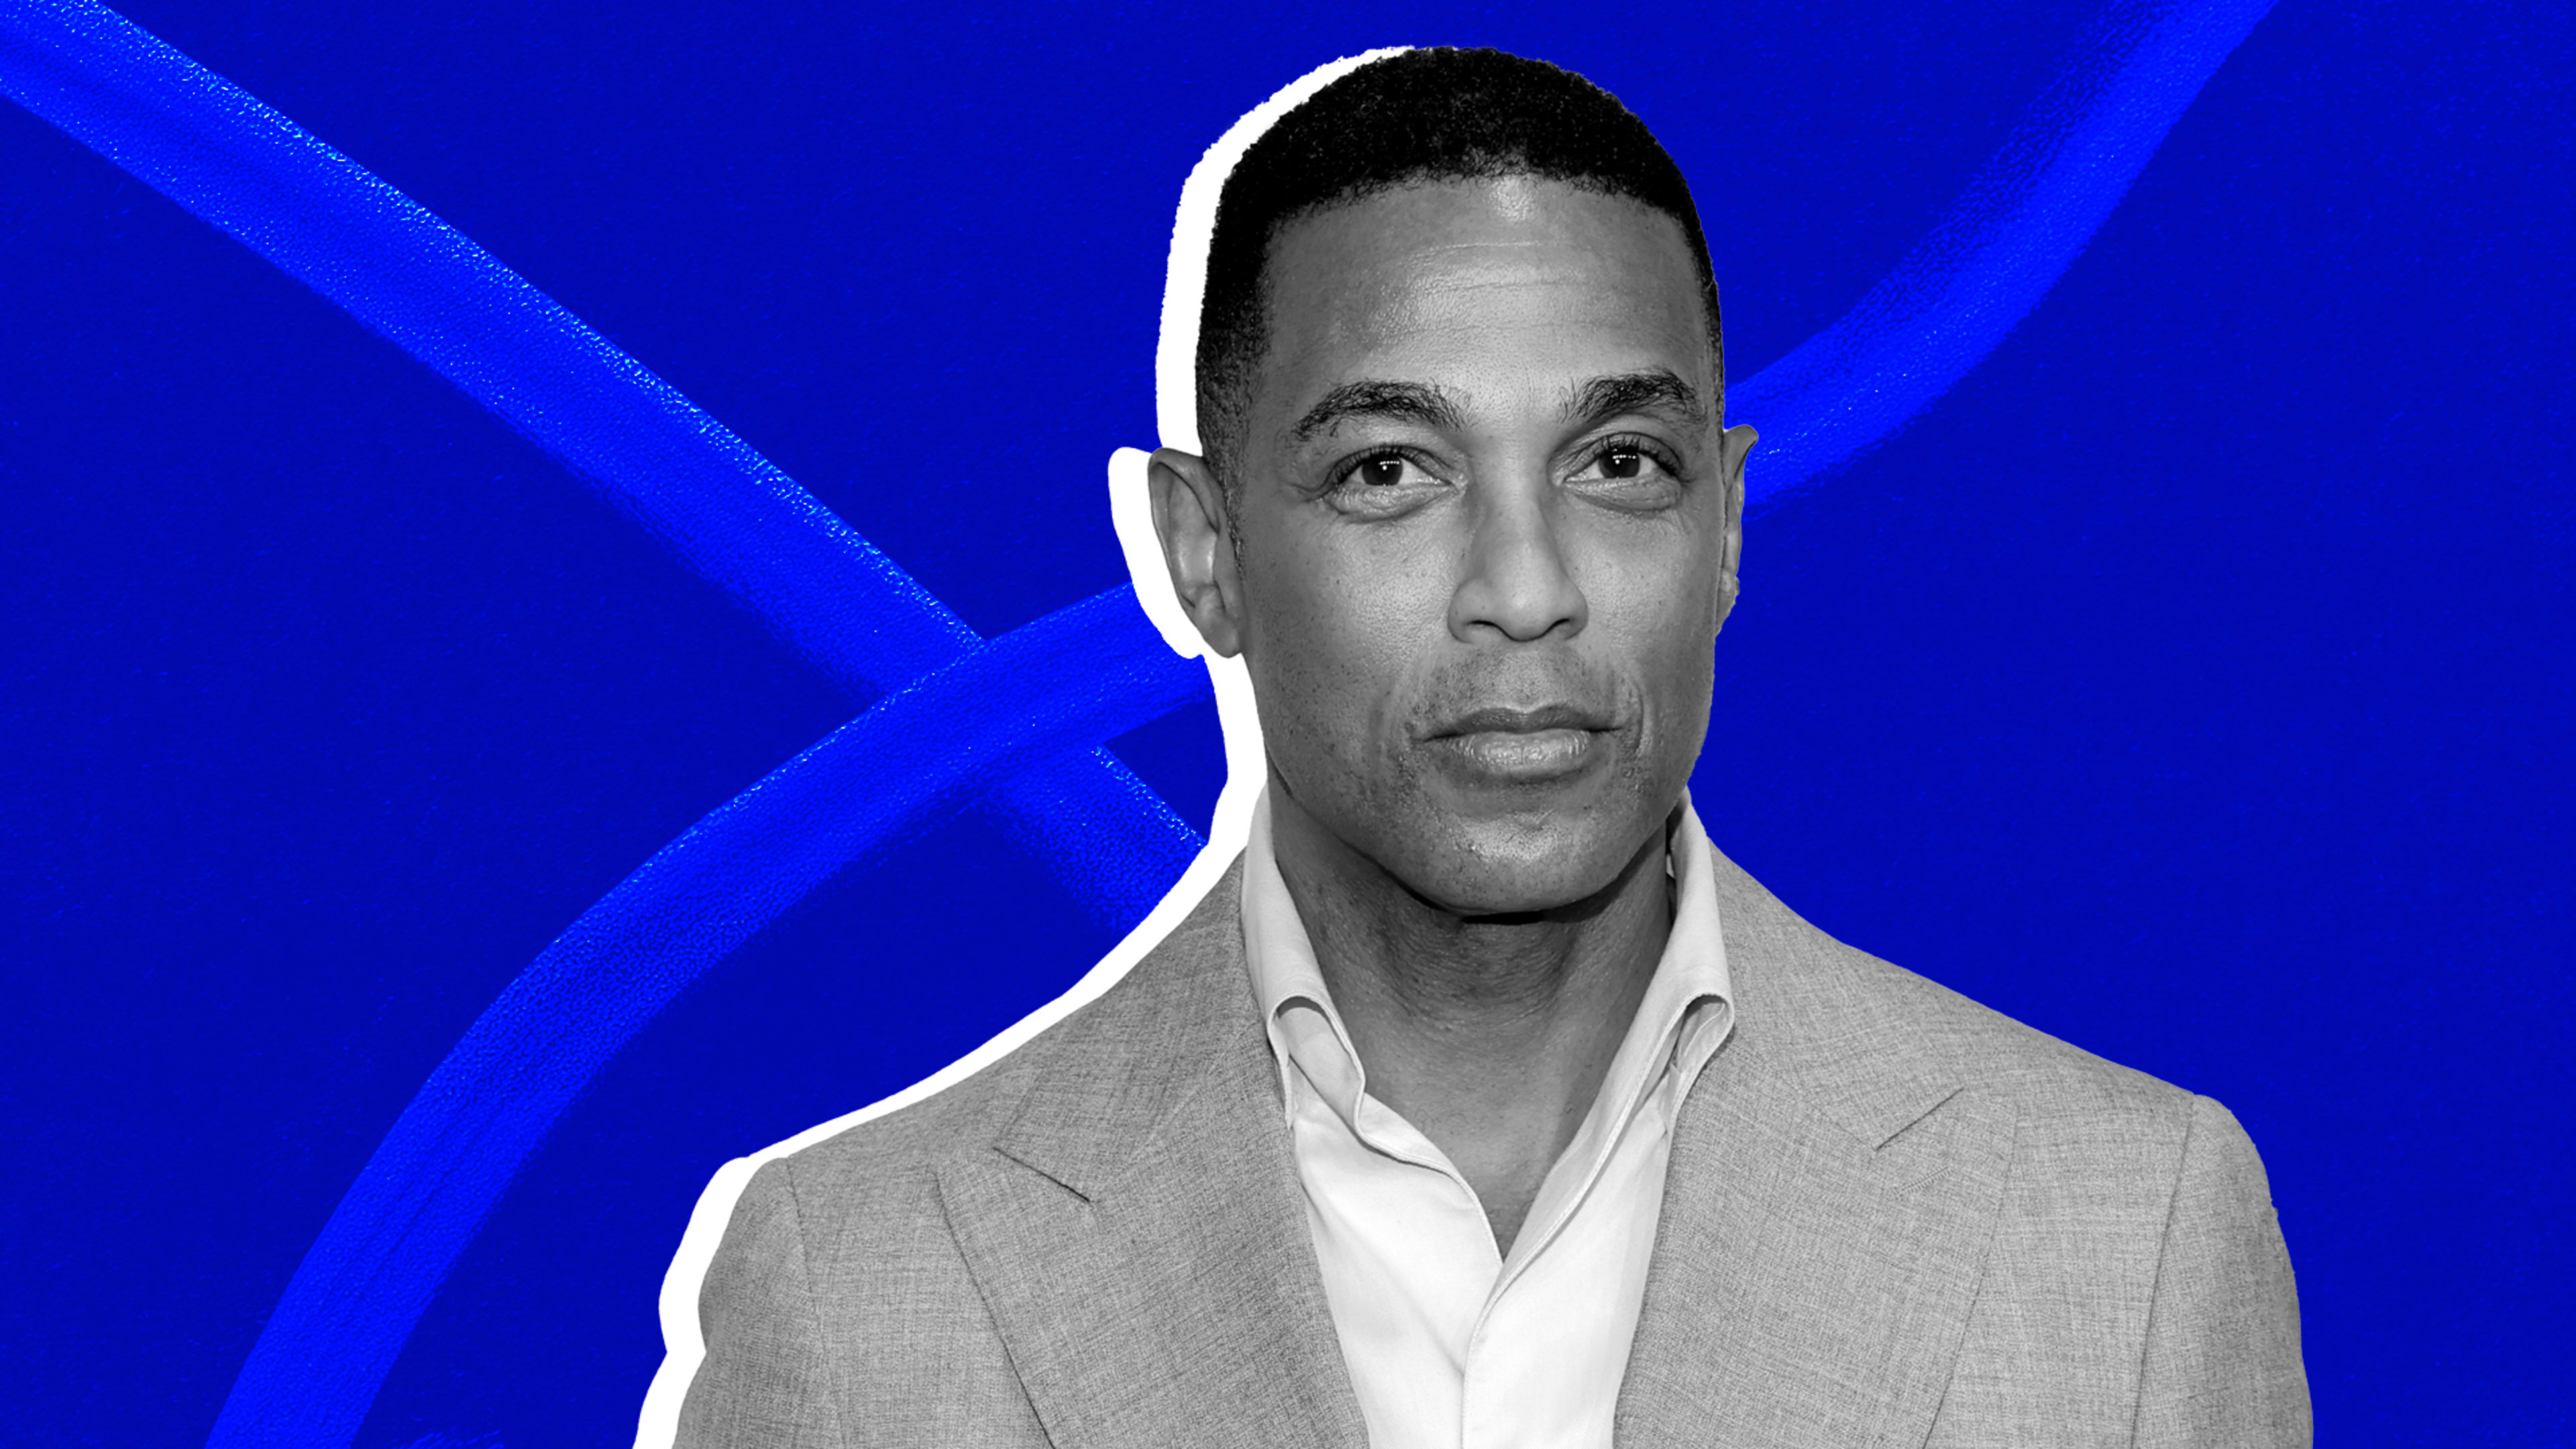 Don Lemon says Elon Musk failed to live up to his free speech promises, after his X show is quickly canceled